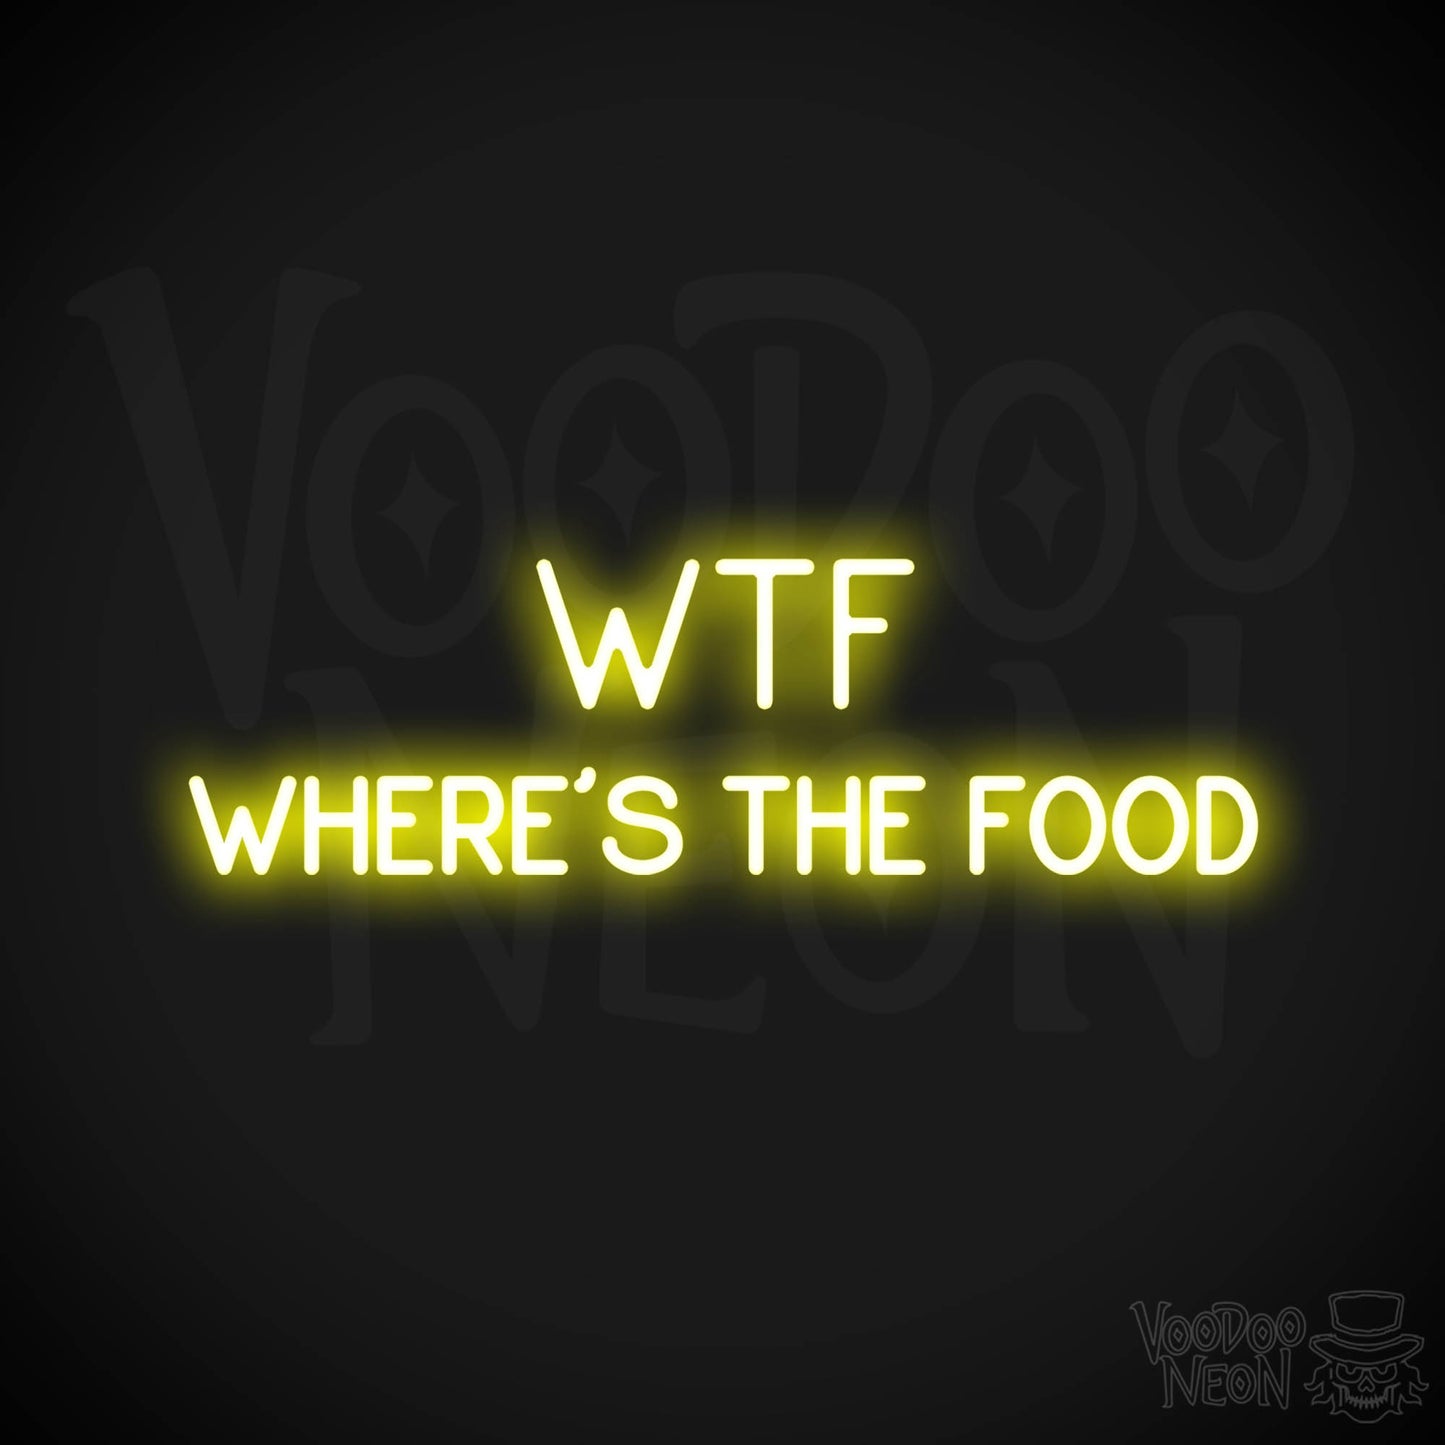 Wtf (Wheres The Food) LED Neon - Yellow